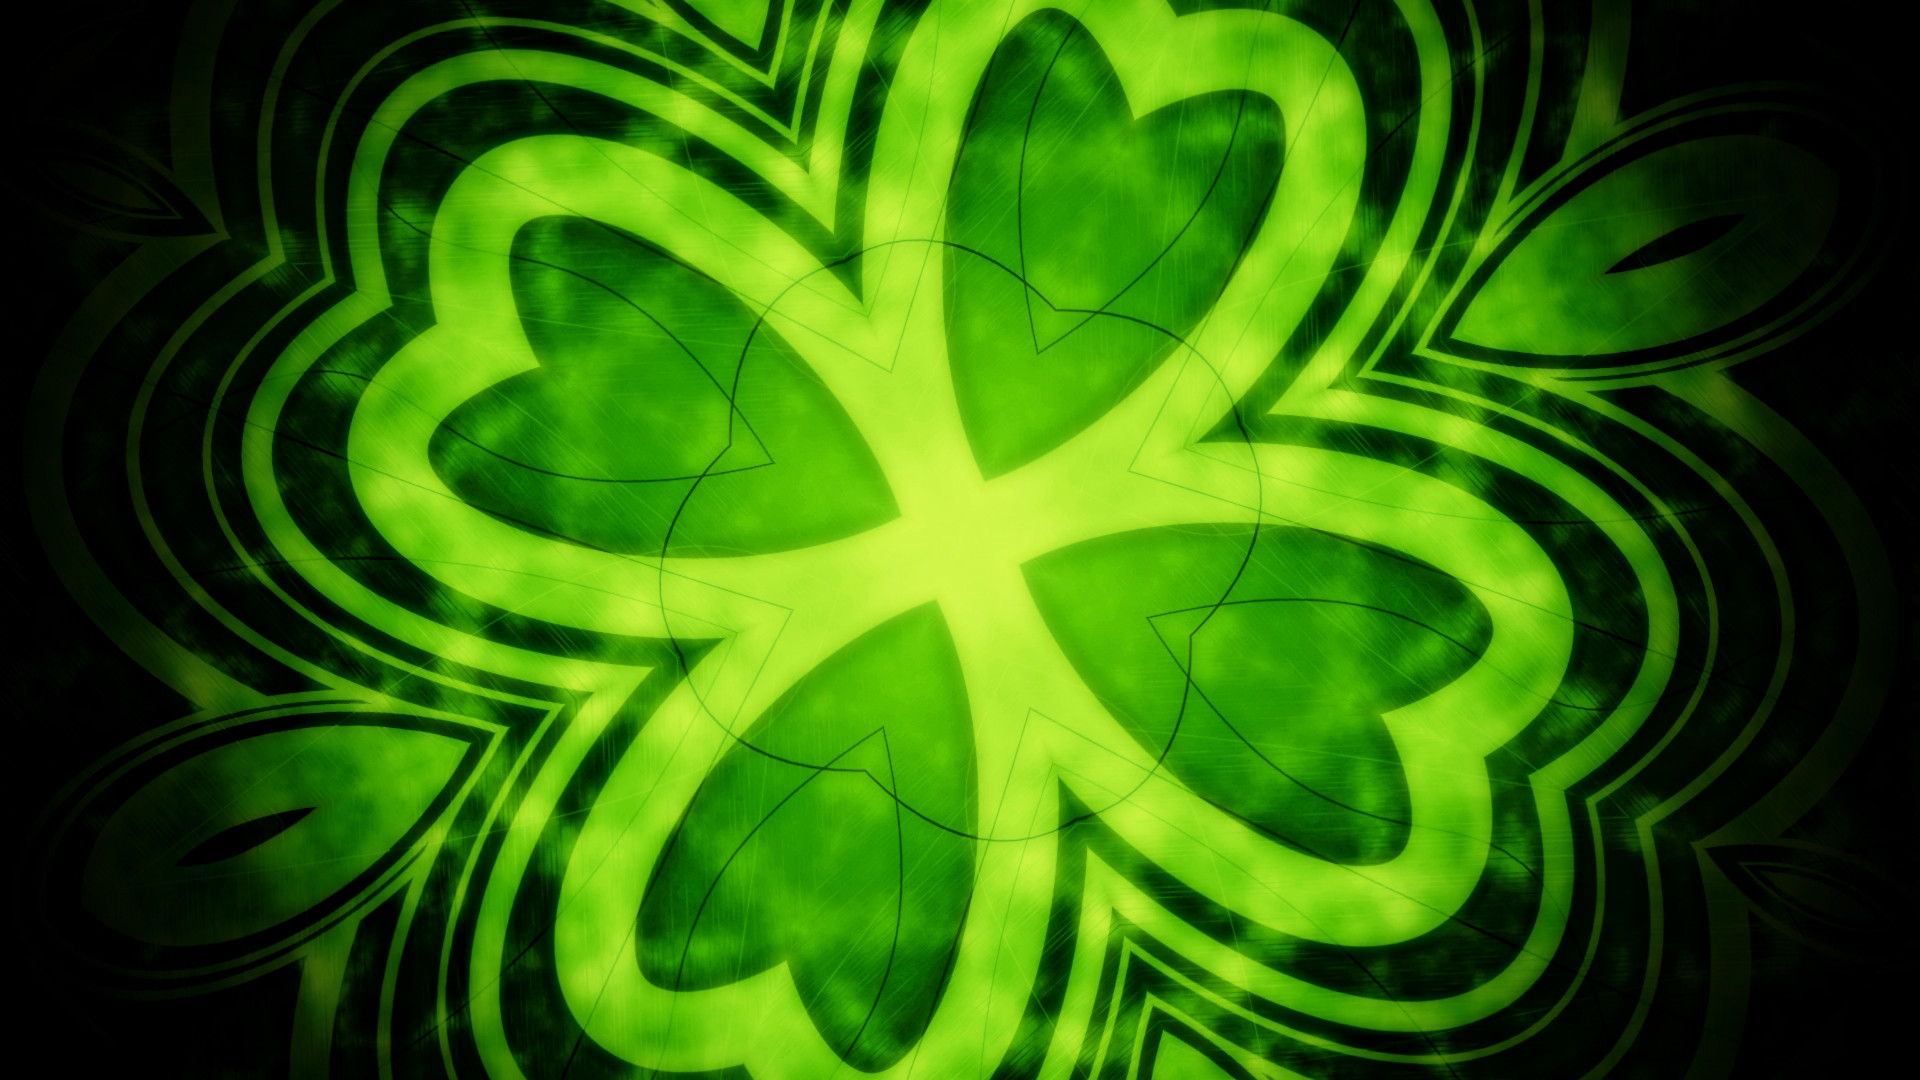 1920x1080 This collection of wallpapers is centered around the common theme of “St. Patrick's  Day“.